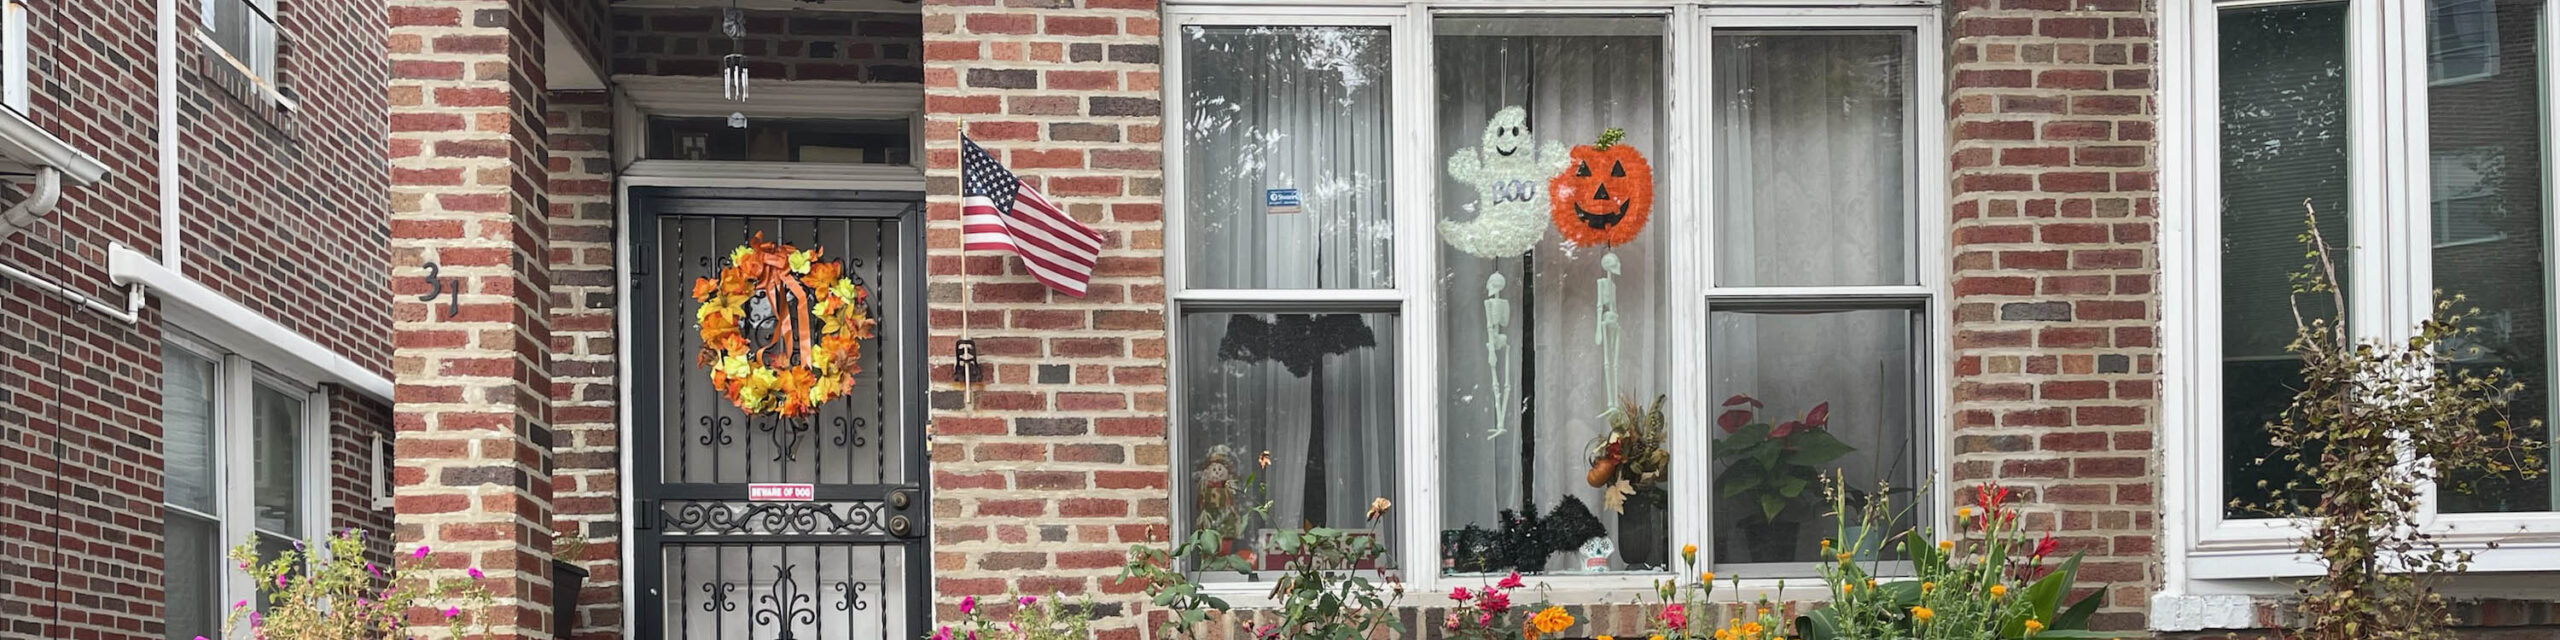 Front door with fall wreat and exterior windows with Halloween ghost and pumpkin decor